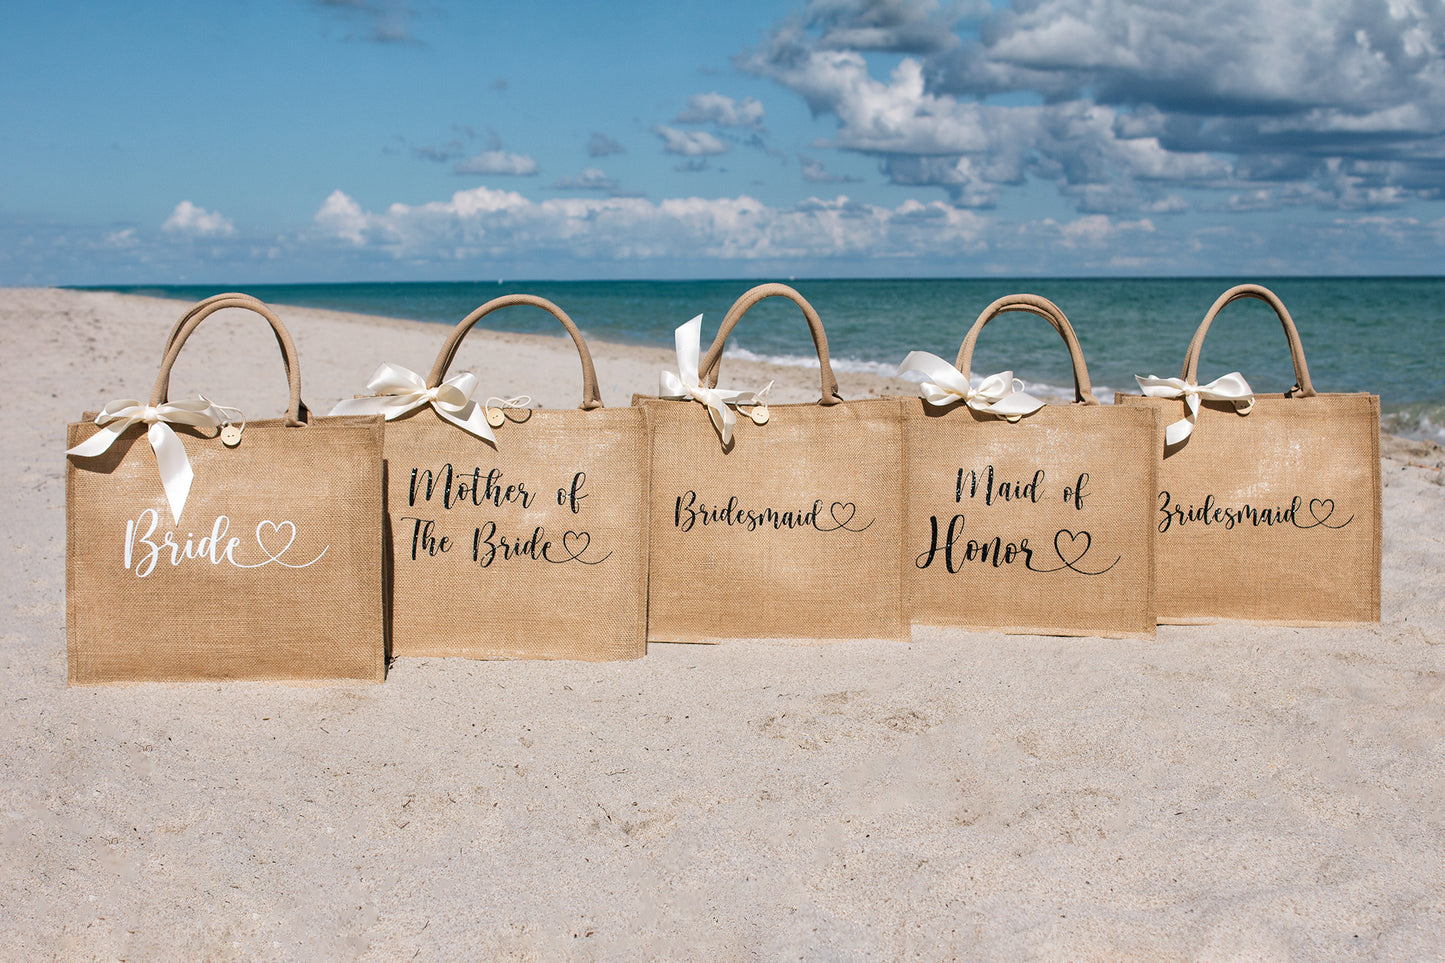 Customized Tote Bags for Whole Bride Squad - Style 7